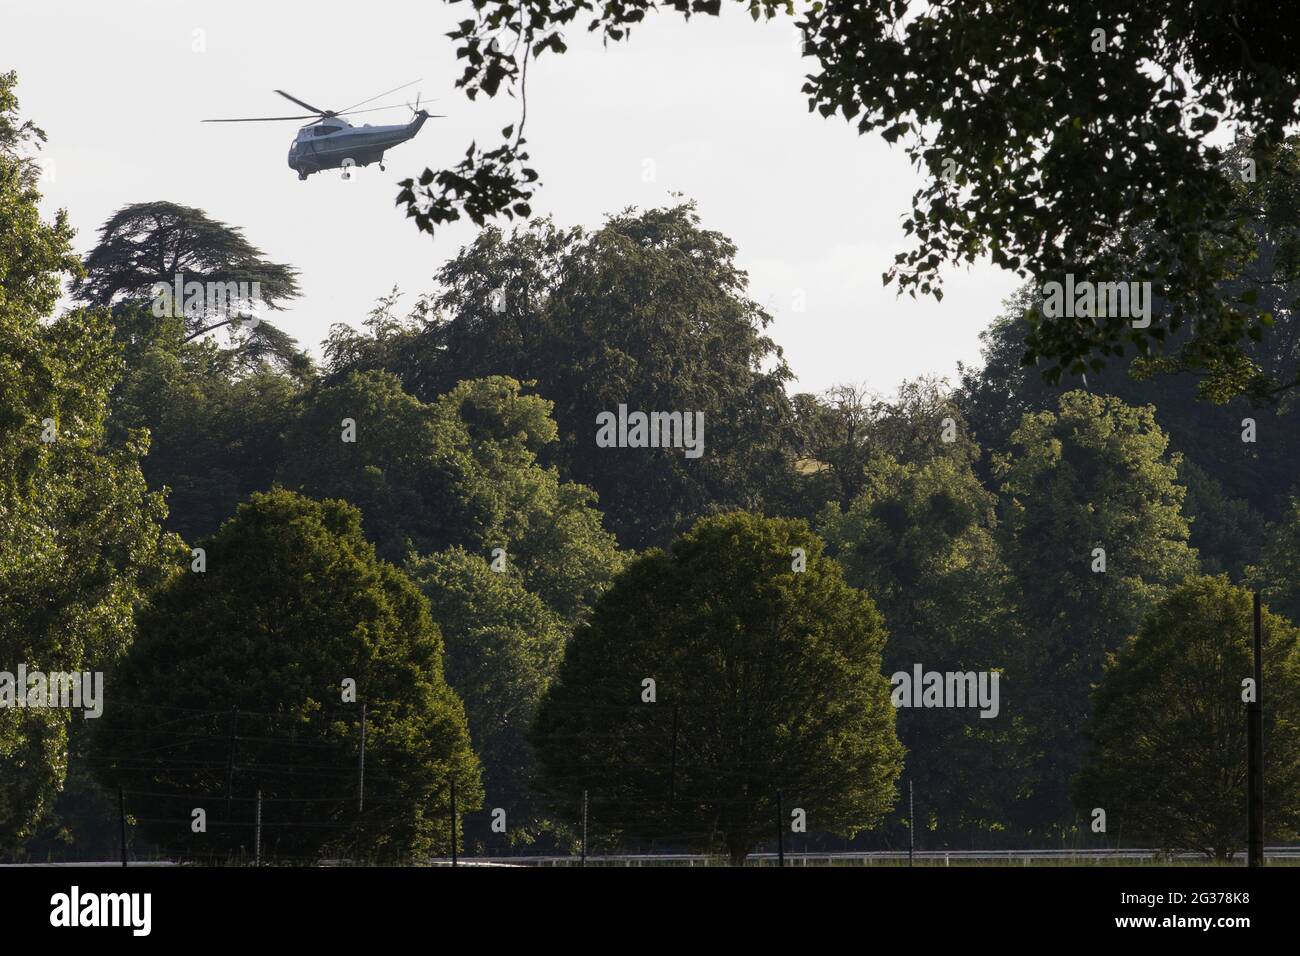 Windsor, UK. 13th June, 2021. One of President Biden's VH-3D Sea King helicopters, known as Marine One, is pictured leaving Windsor Castle. President Biden and First Lady Jill Biden were welcomed at Windsor Castle by the Queen following the G7 summit with a Guard of Honour followed by afternoon tea. Credit: Mark Kerrison/Alamy Live News Stock Photo